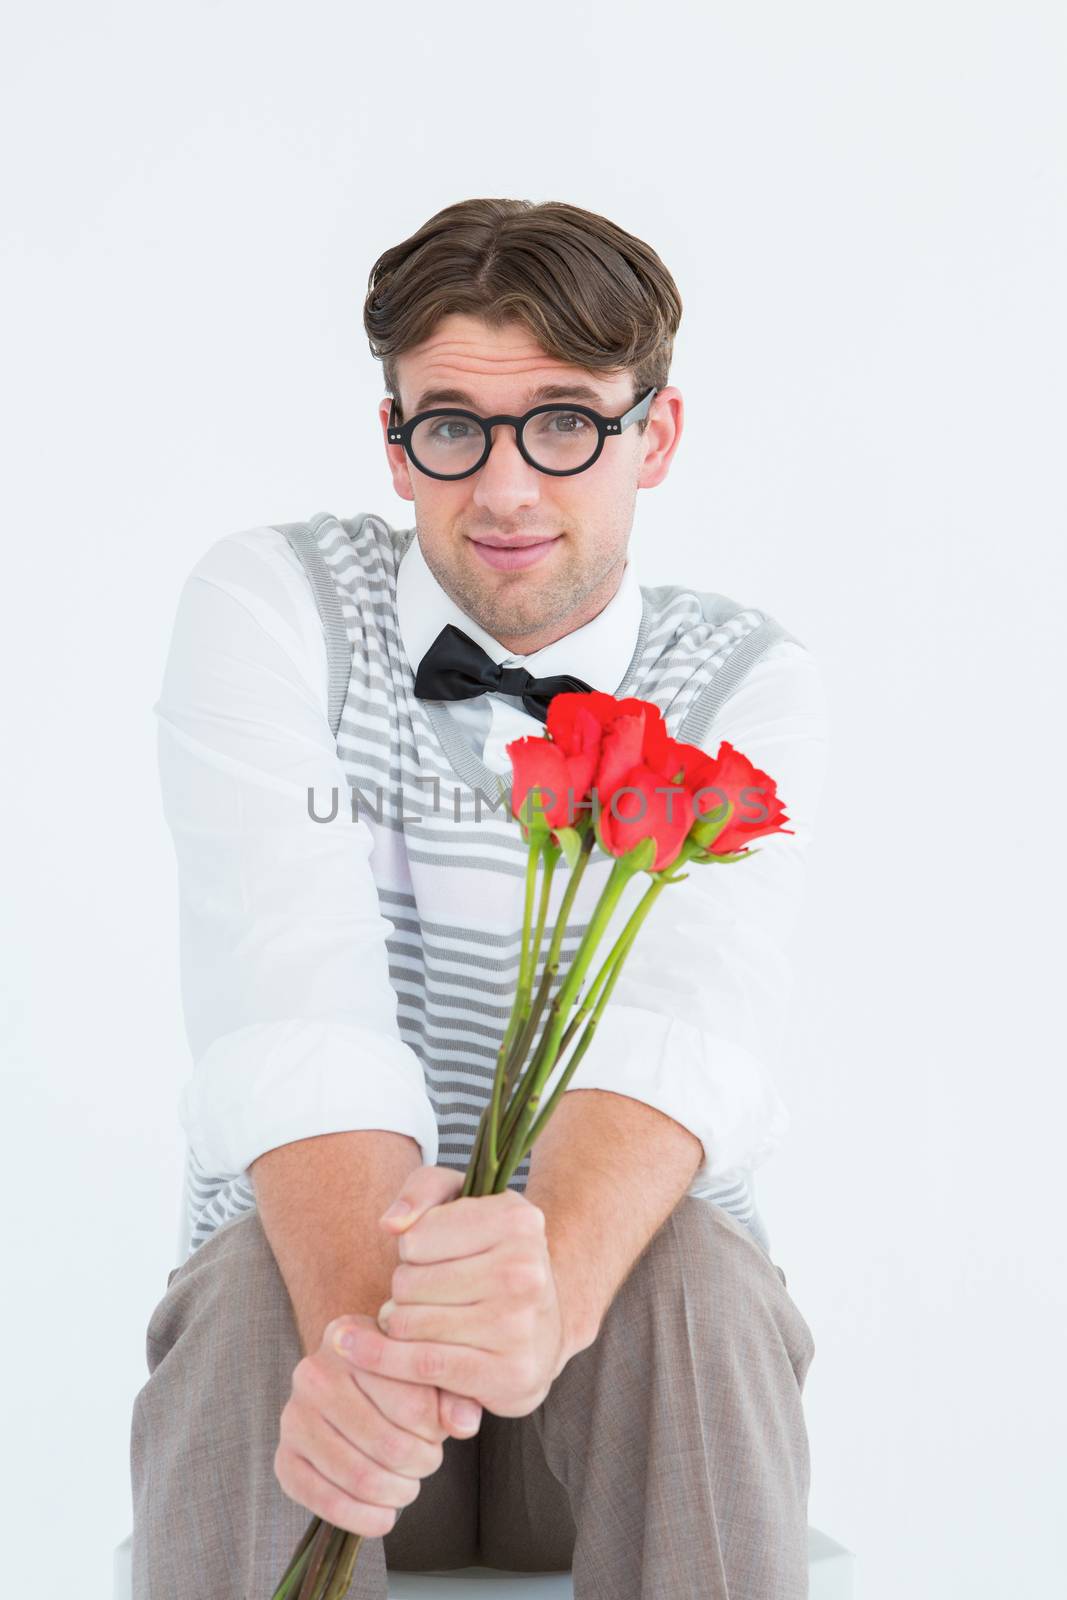 Geeky hipster offering bunch of roses on white background